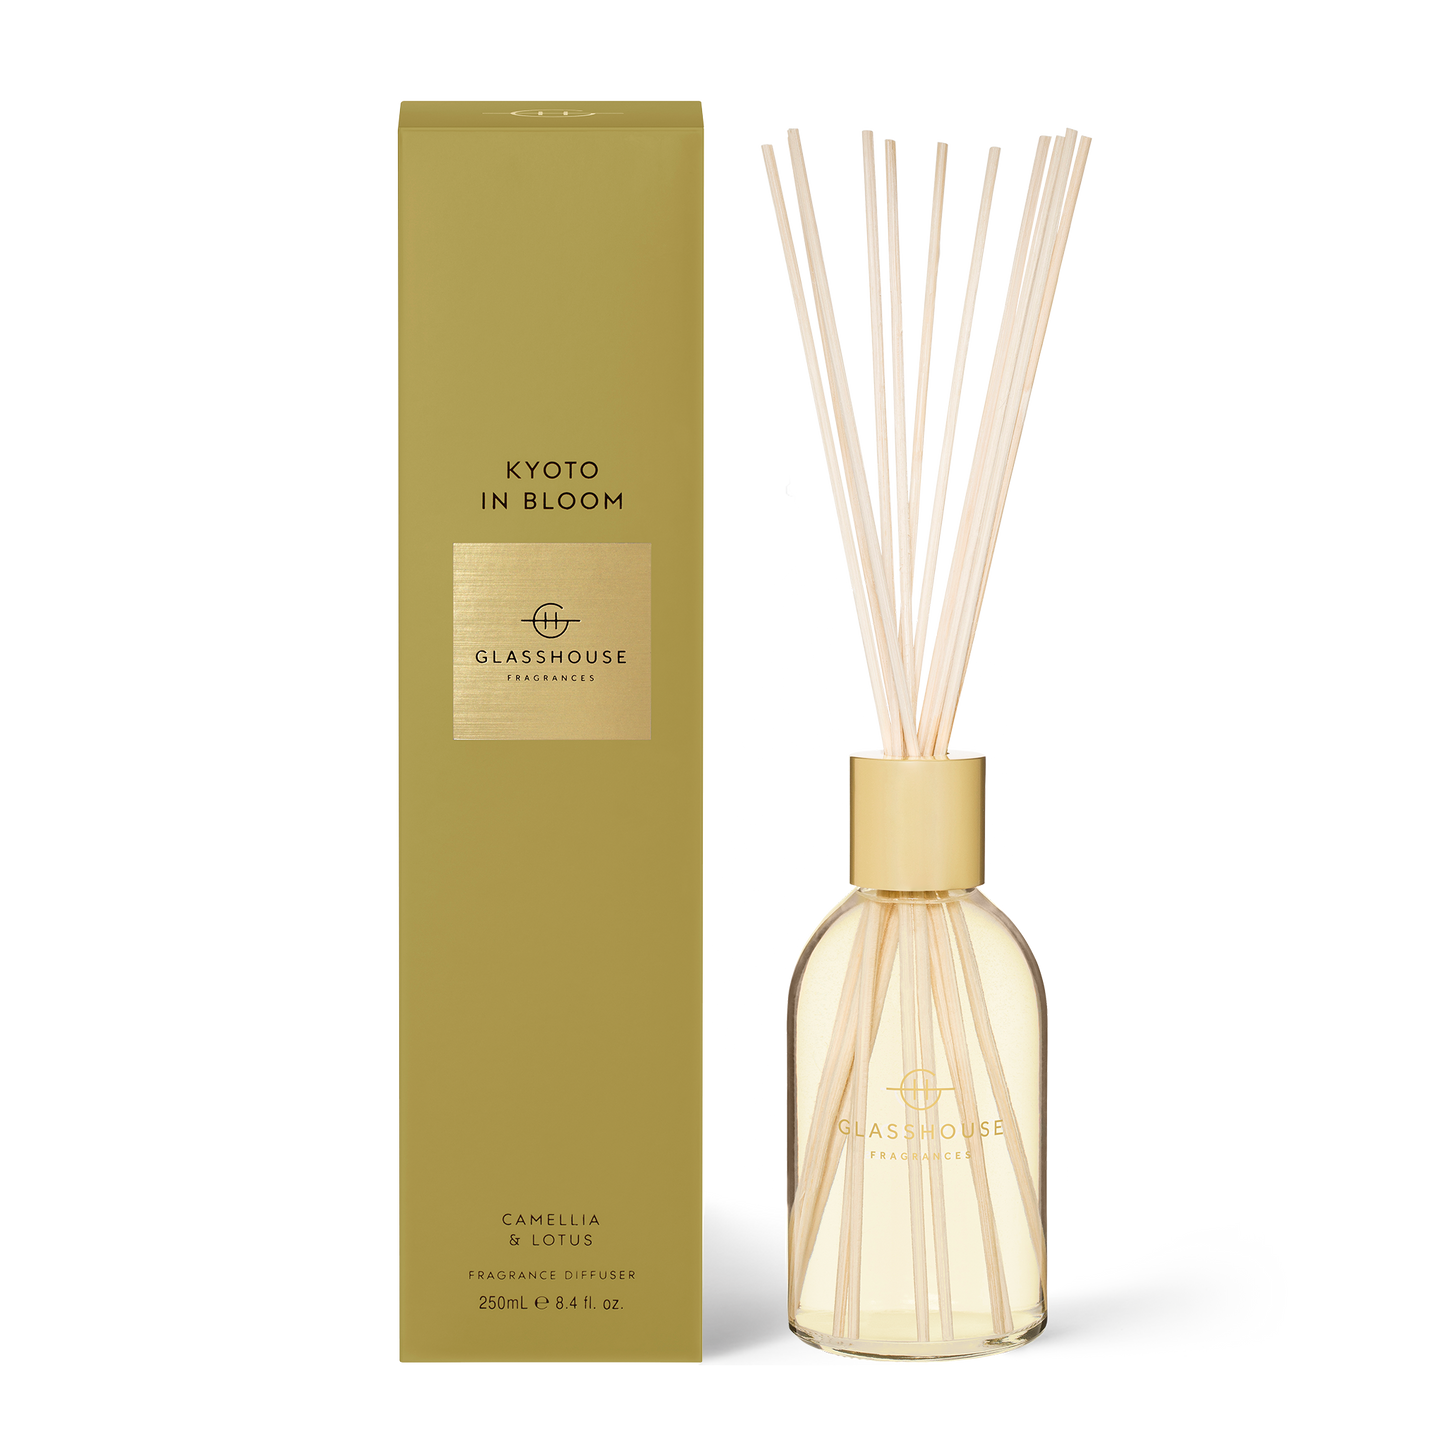 Glasshouse “Kyoto In Bloom” Diffuser